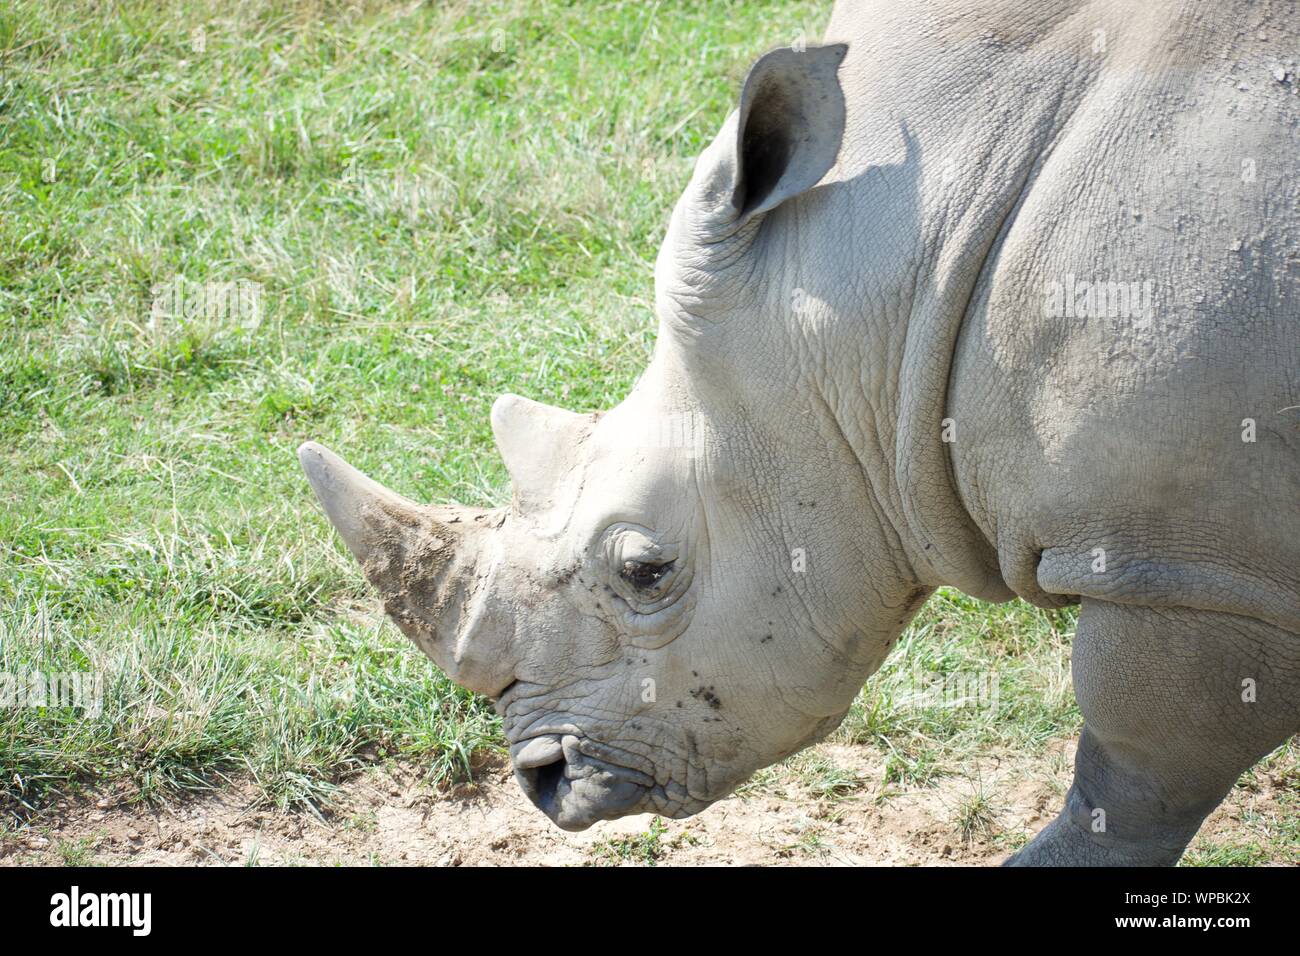 Single White Rhino at The Wilds in Cumberland Ohio. Wide lipped rhinoceros often hunted for the ivory of their horns. Considered one of the big 5, the Stock Photo